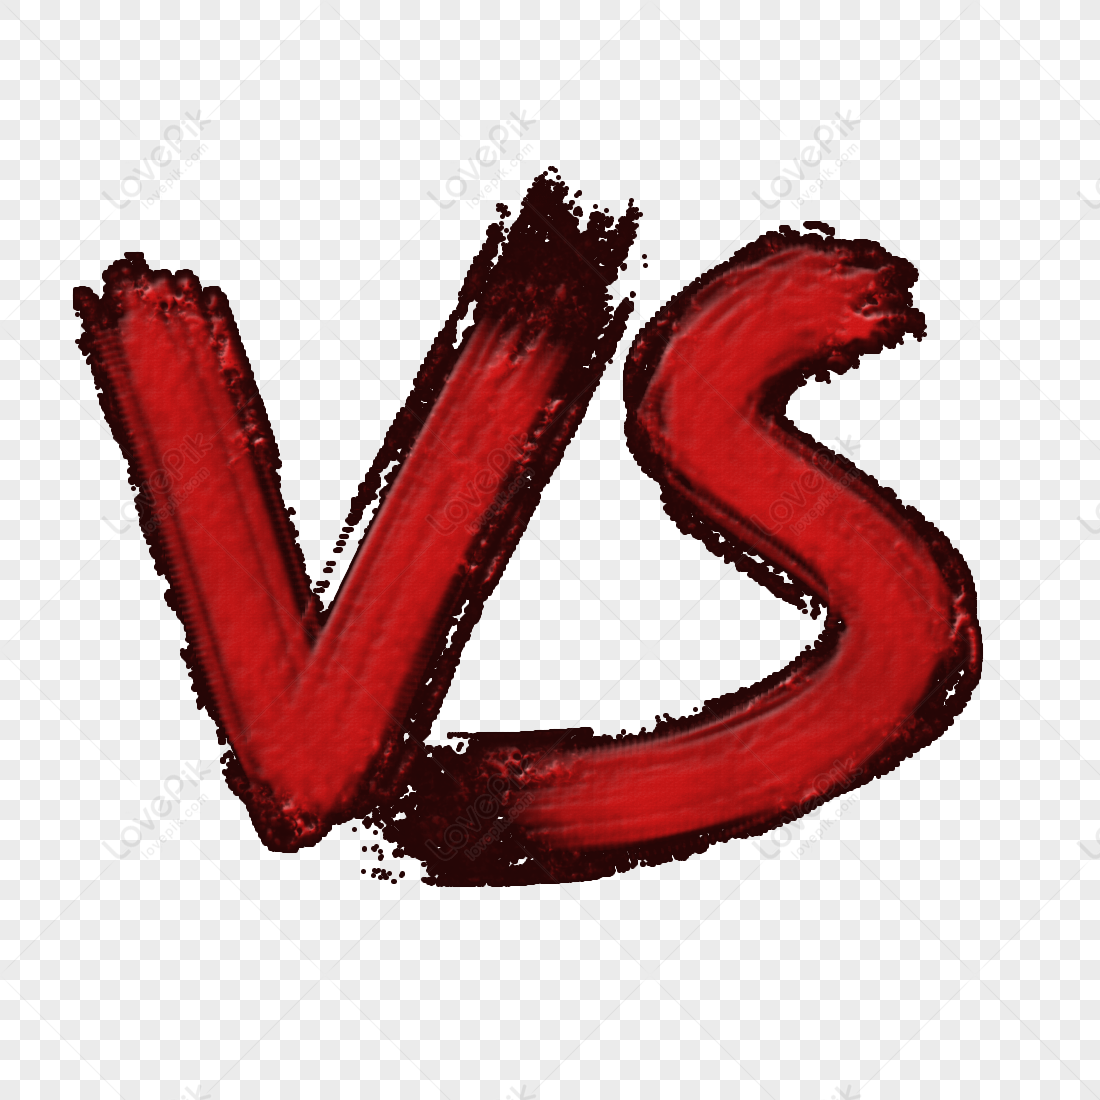 Vs png images